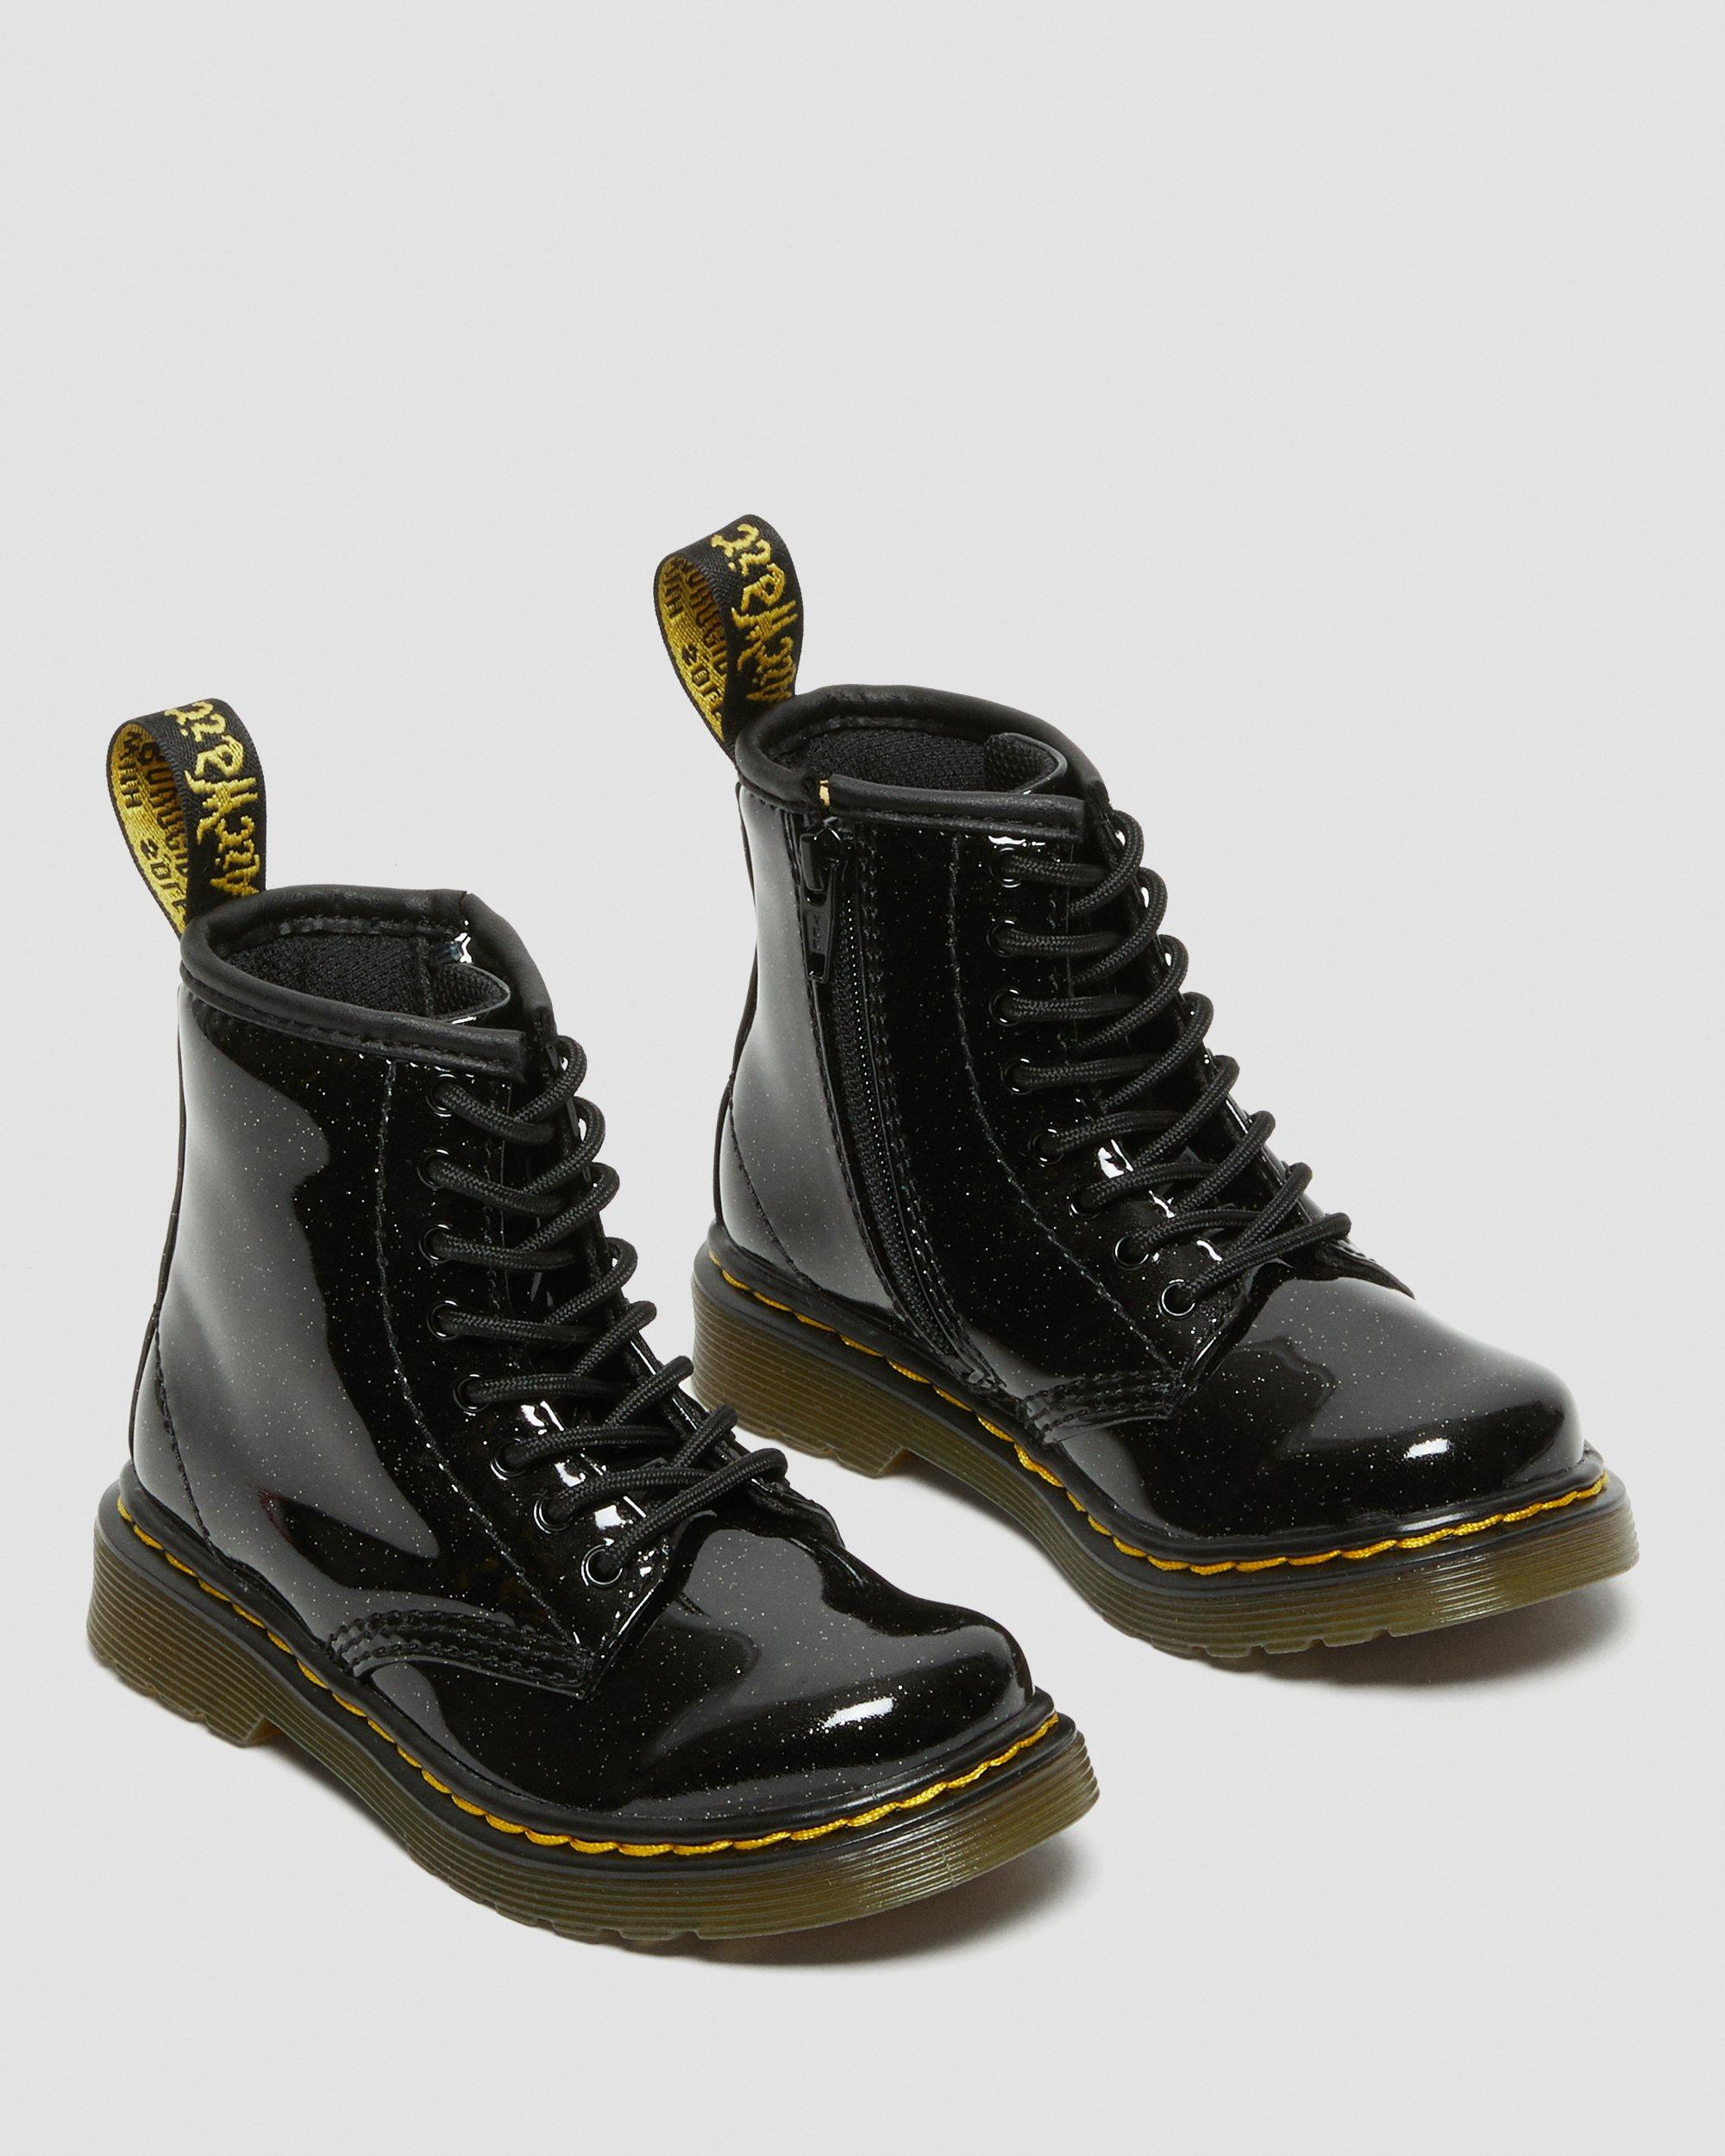 Toddler 1460 Glitter Lace Up Boots in Black | Dr. Martens